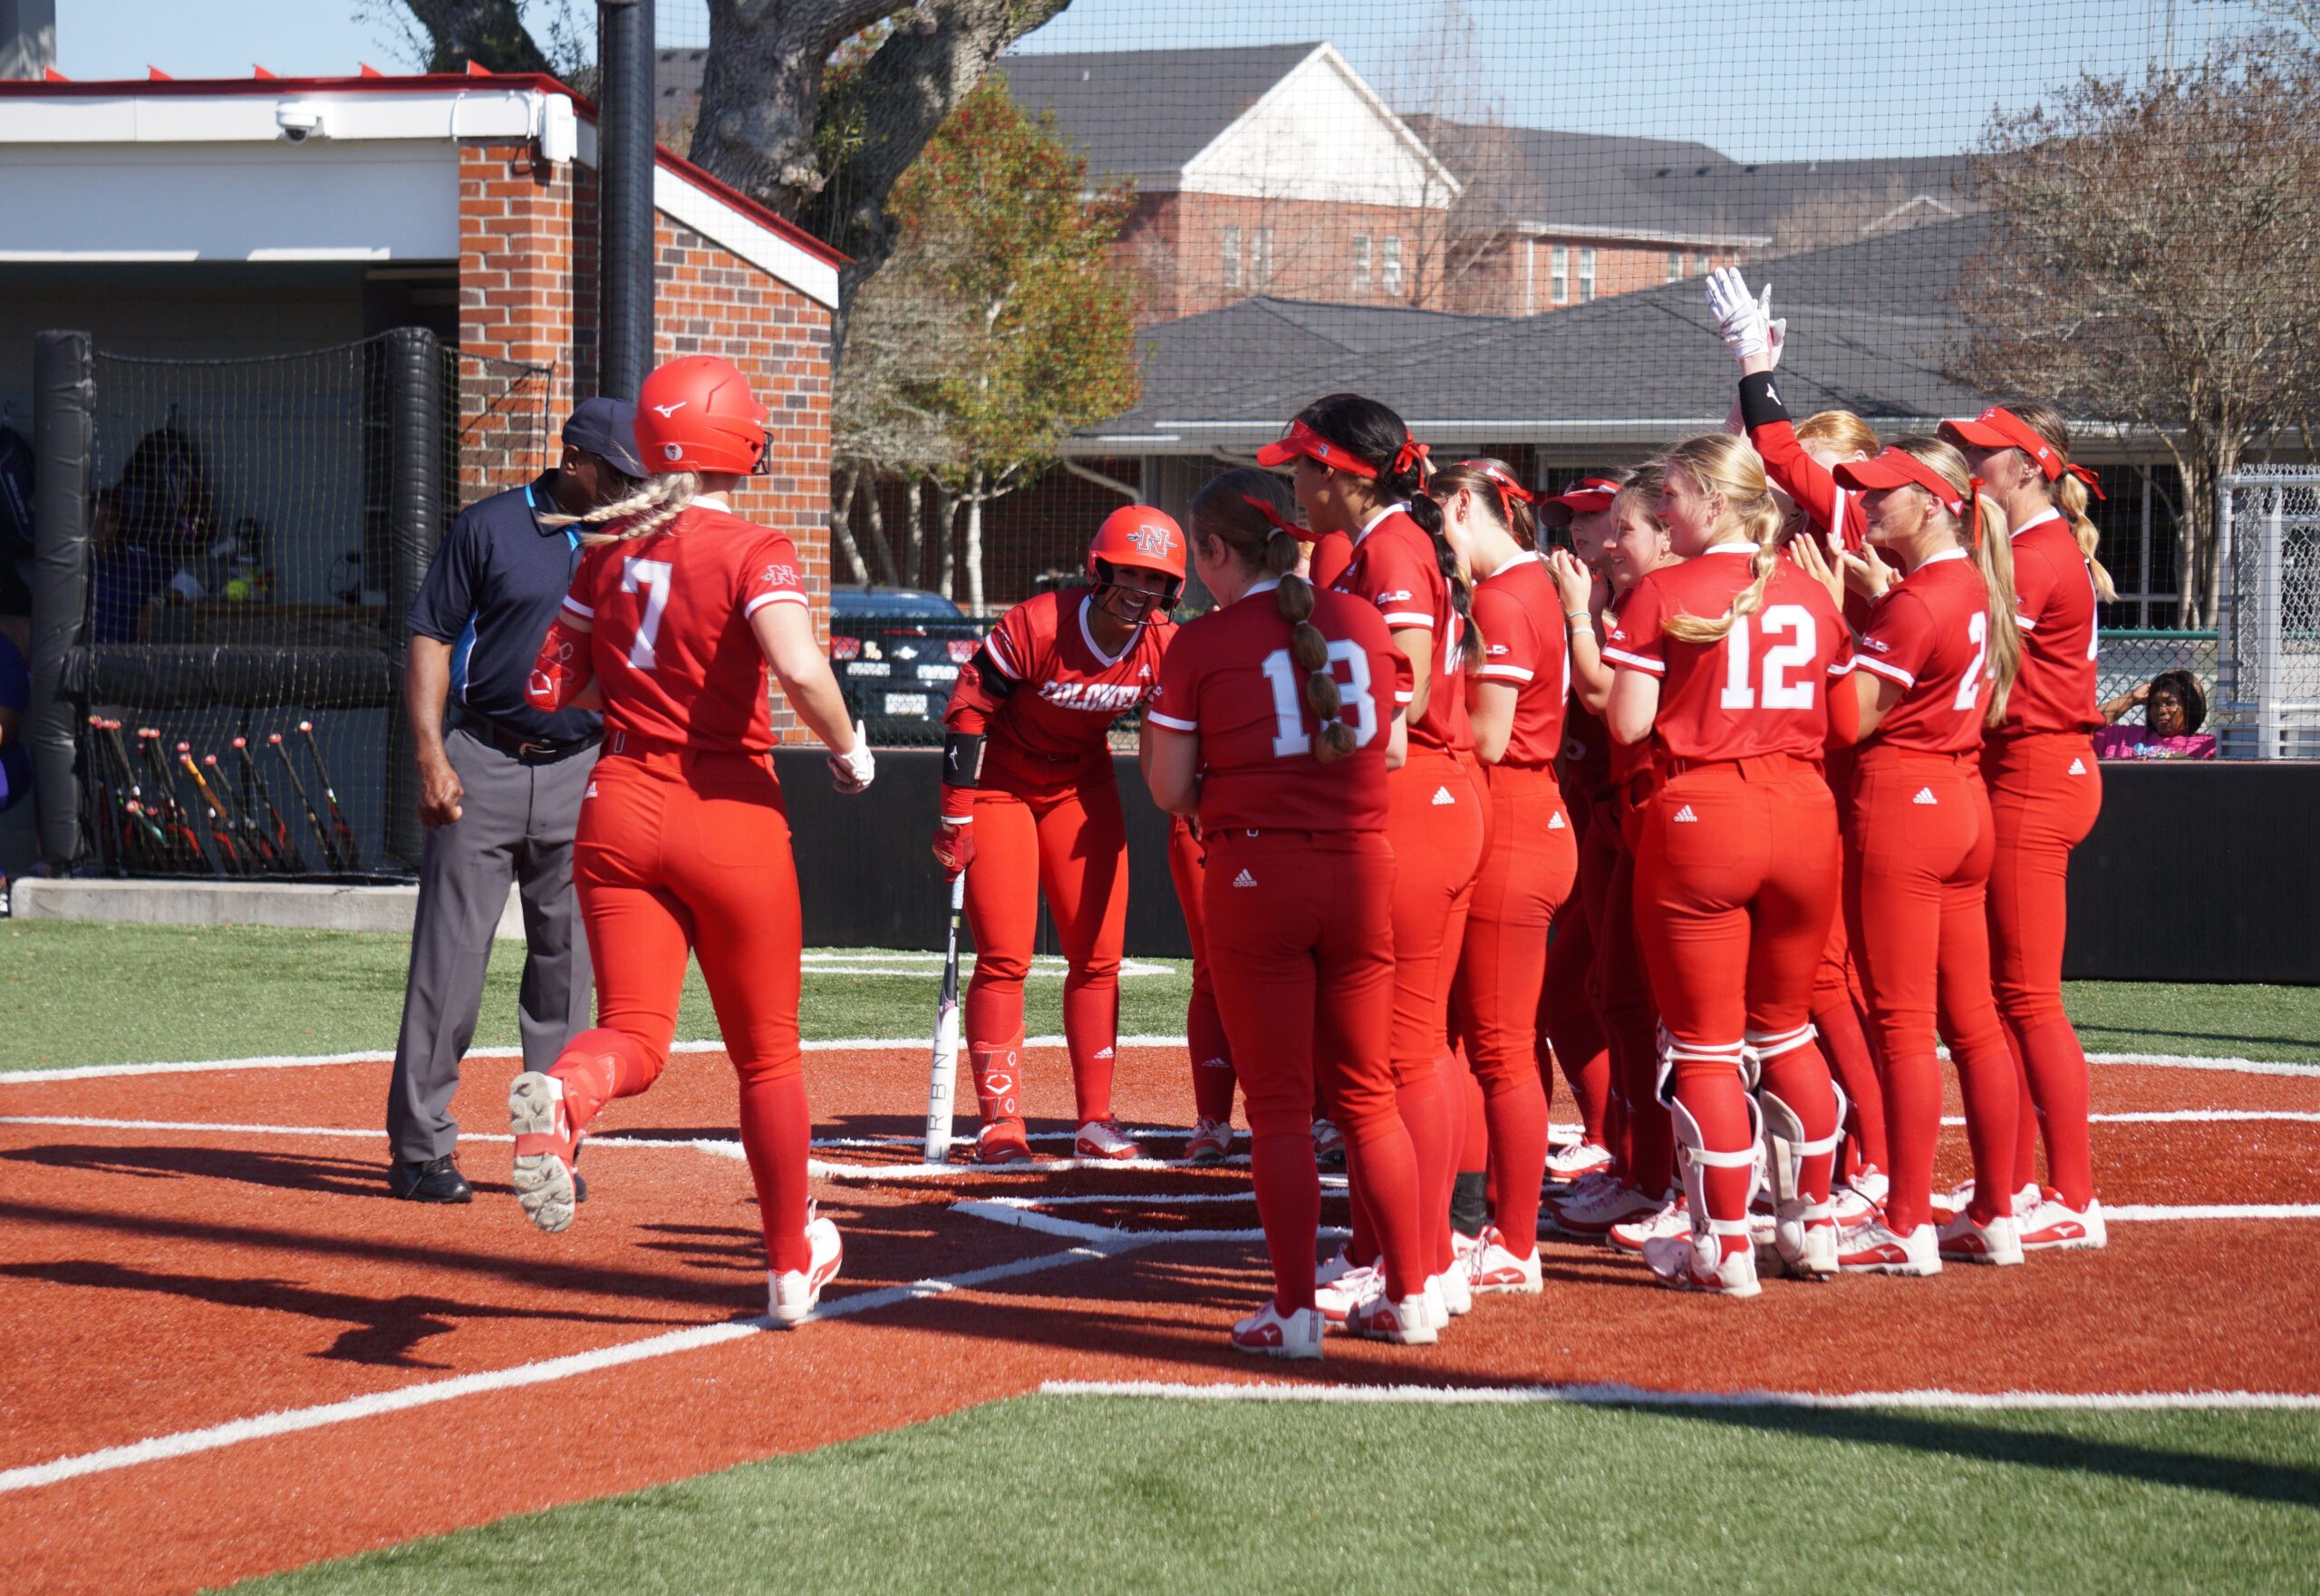 Thumbnail for Nicholls softball team has chance to show how it stacks up against top-ranked Texas